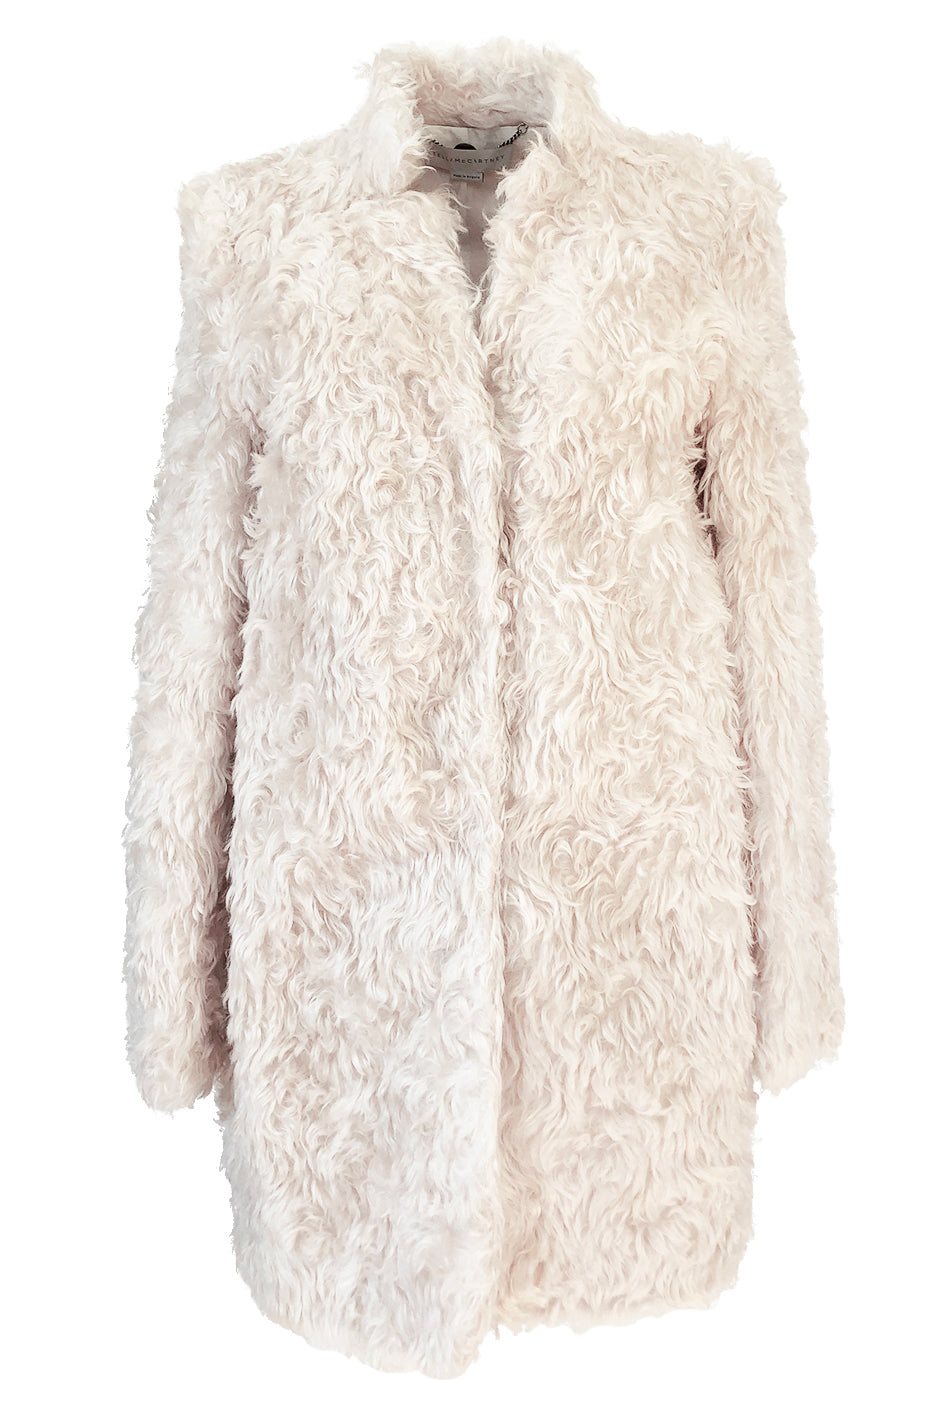 Besætte Belyse Stolthed Fall 2013 Stella McCartney 'Bryce' Ivory Mohair Faux Fur Jacket or Coa –  Shrimpton Couture